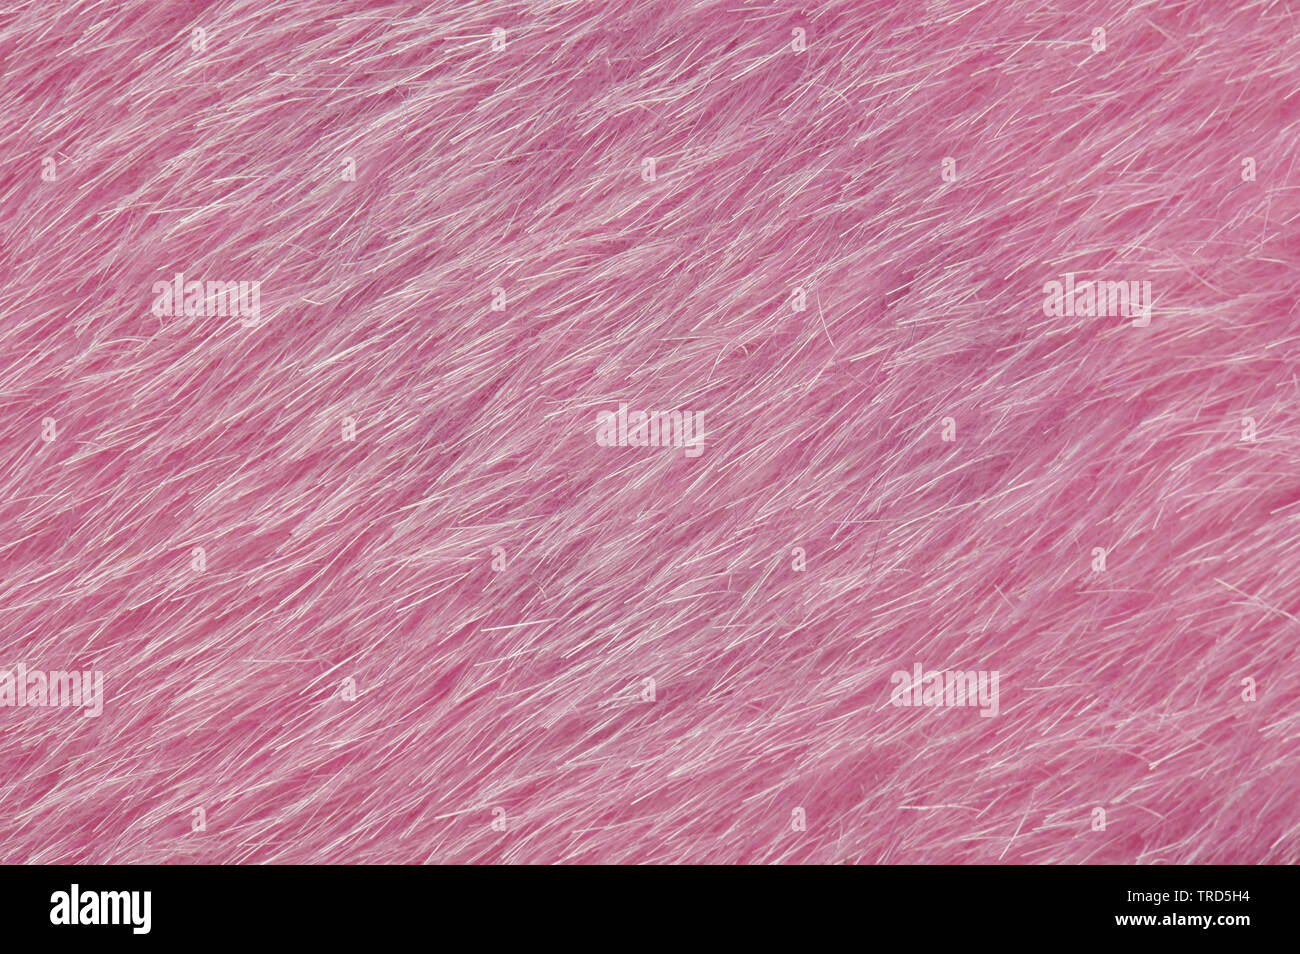 Pink long fur background close up view. Soft hairy backdrop Stock Photo